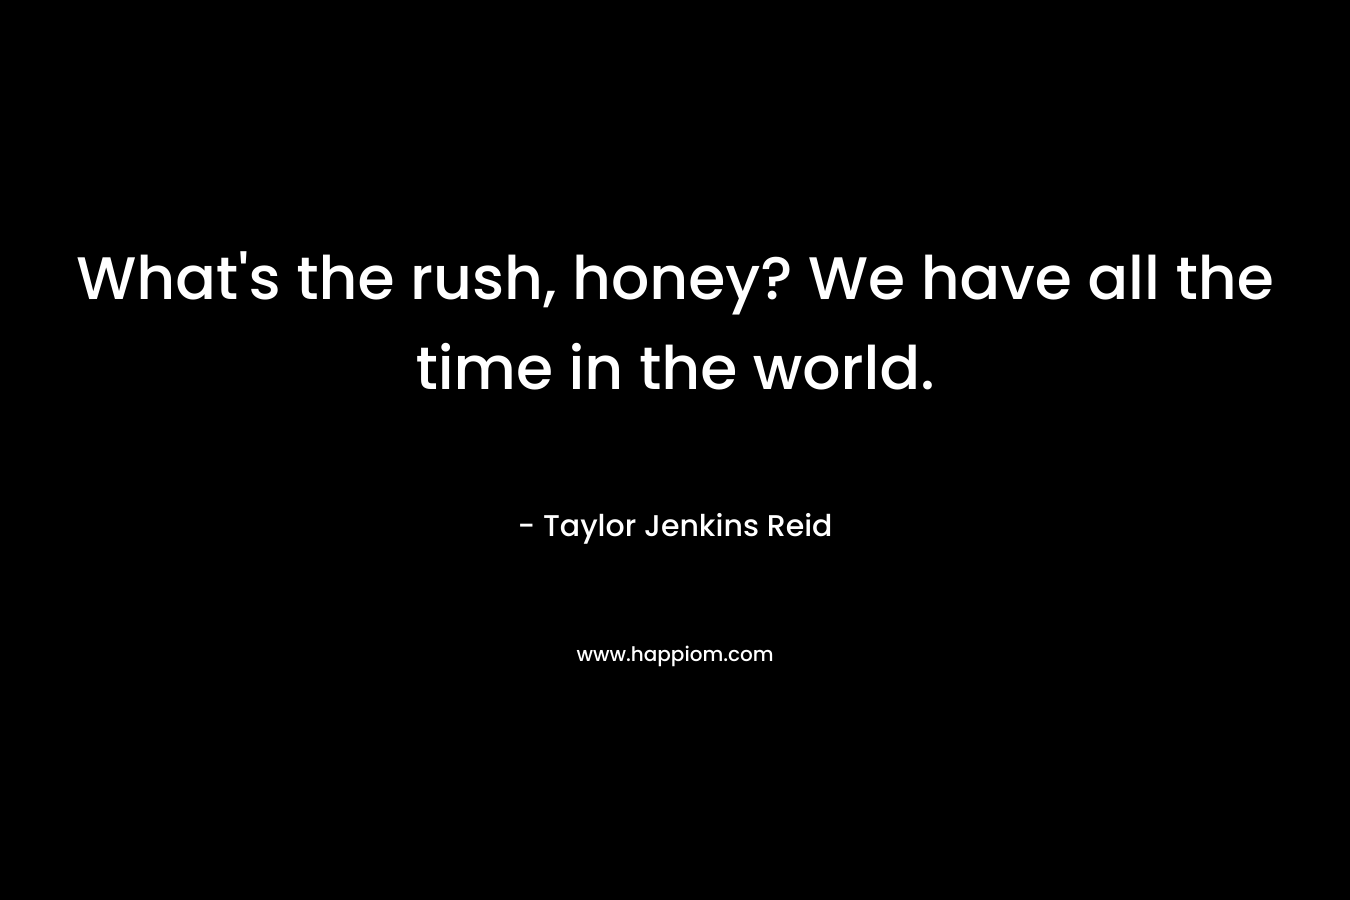 What’s the rush, honey? We have all the time in the world. – Taylor Jenkins Reid